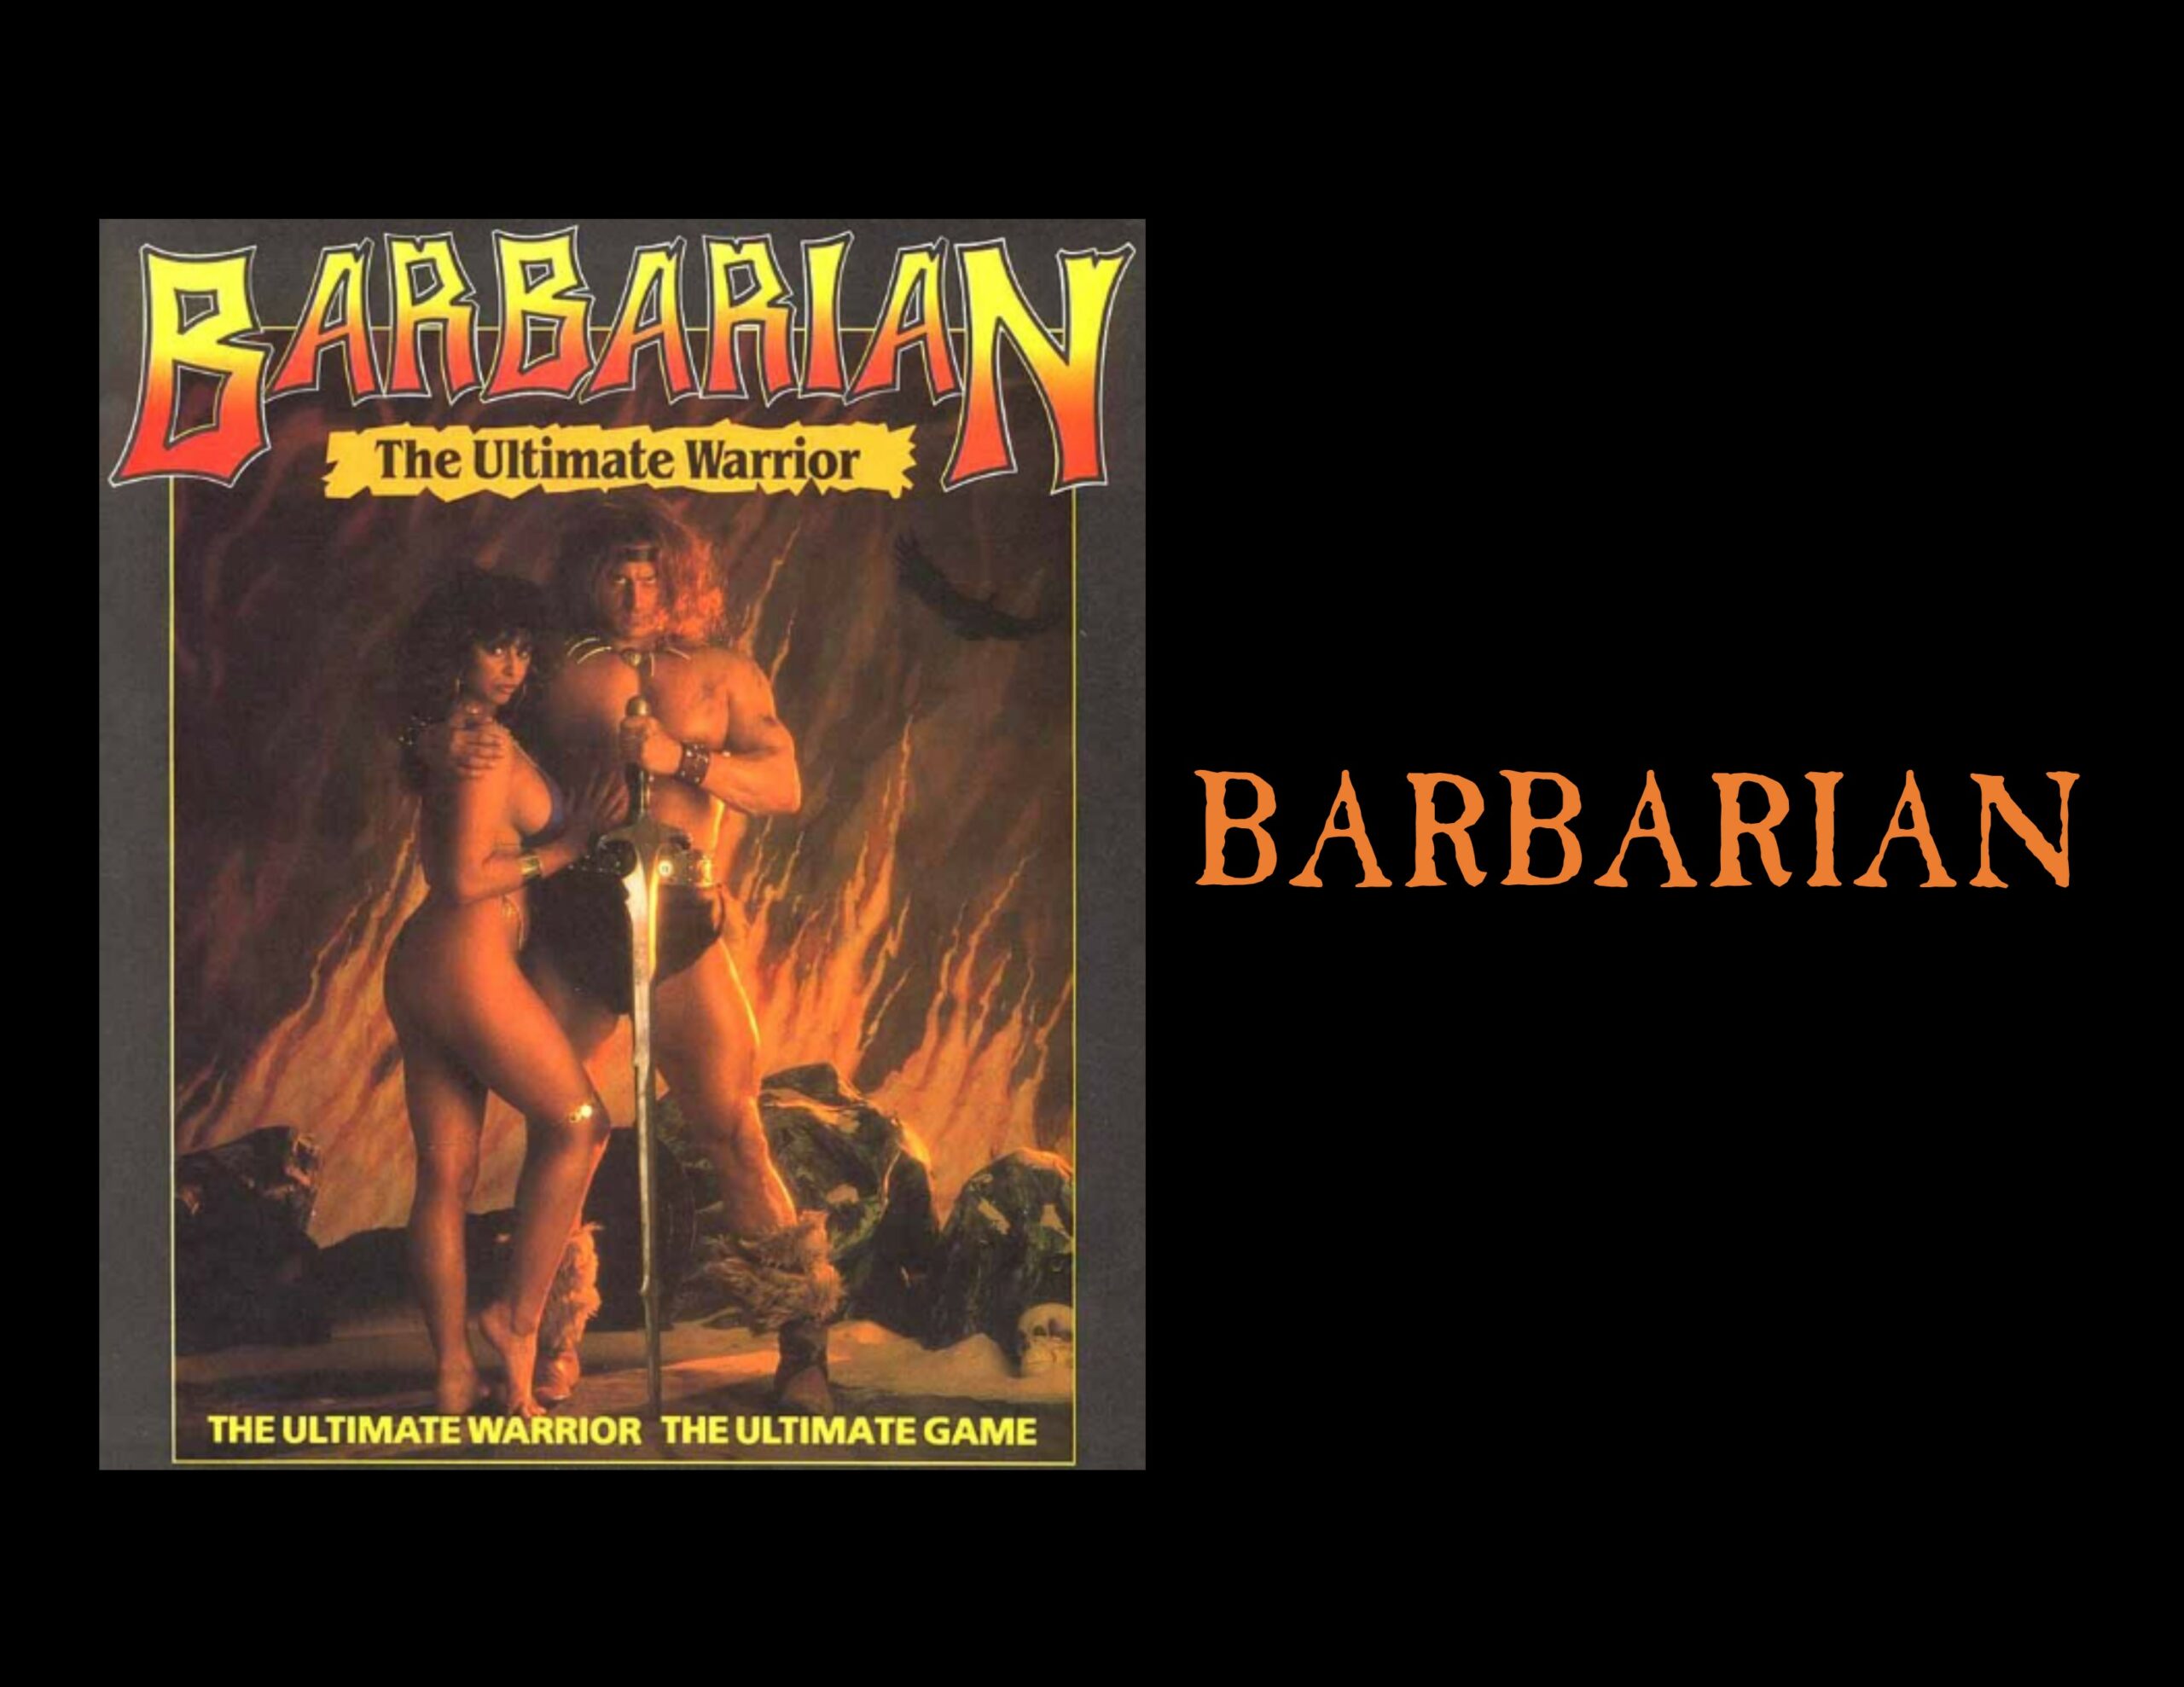 Click This Image To Check Out My YouTube Video Playing Barbarian!